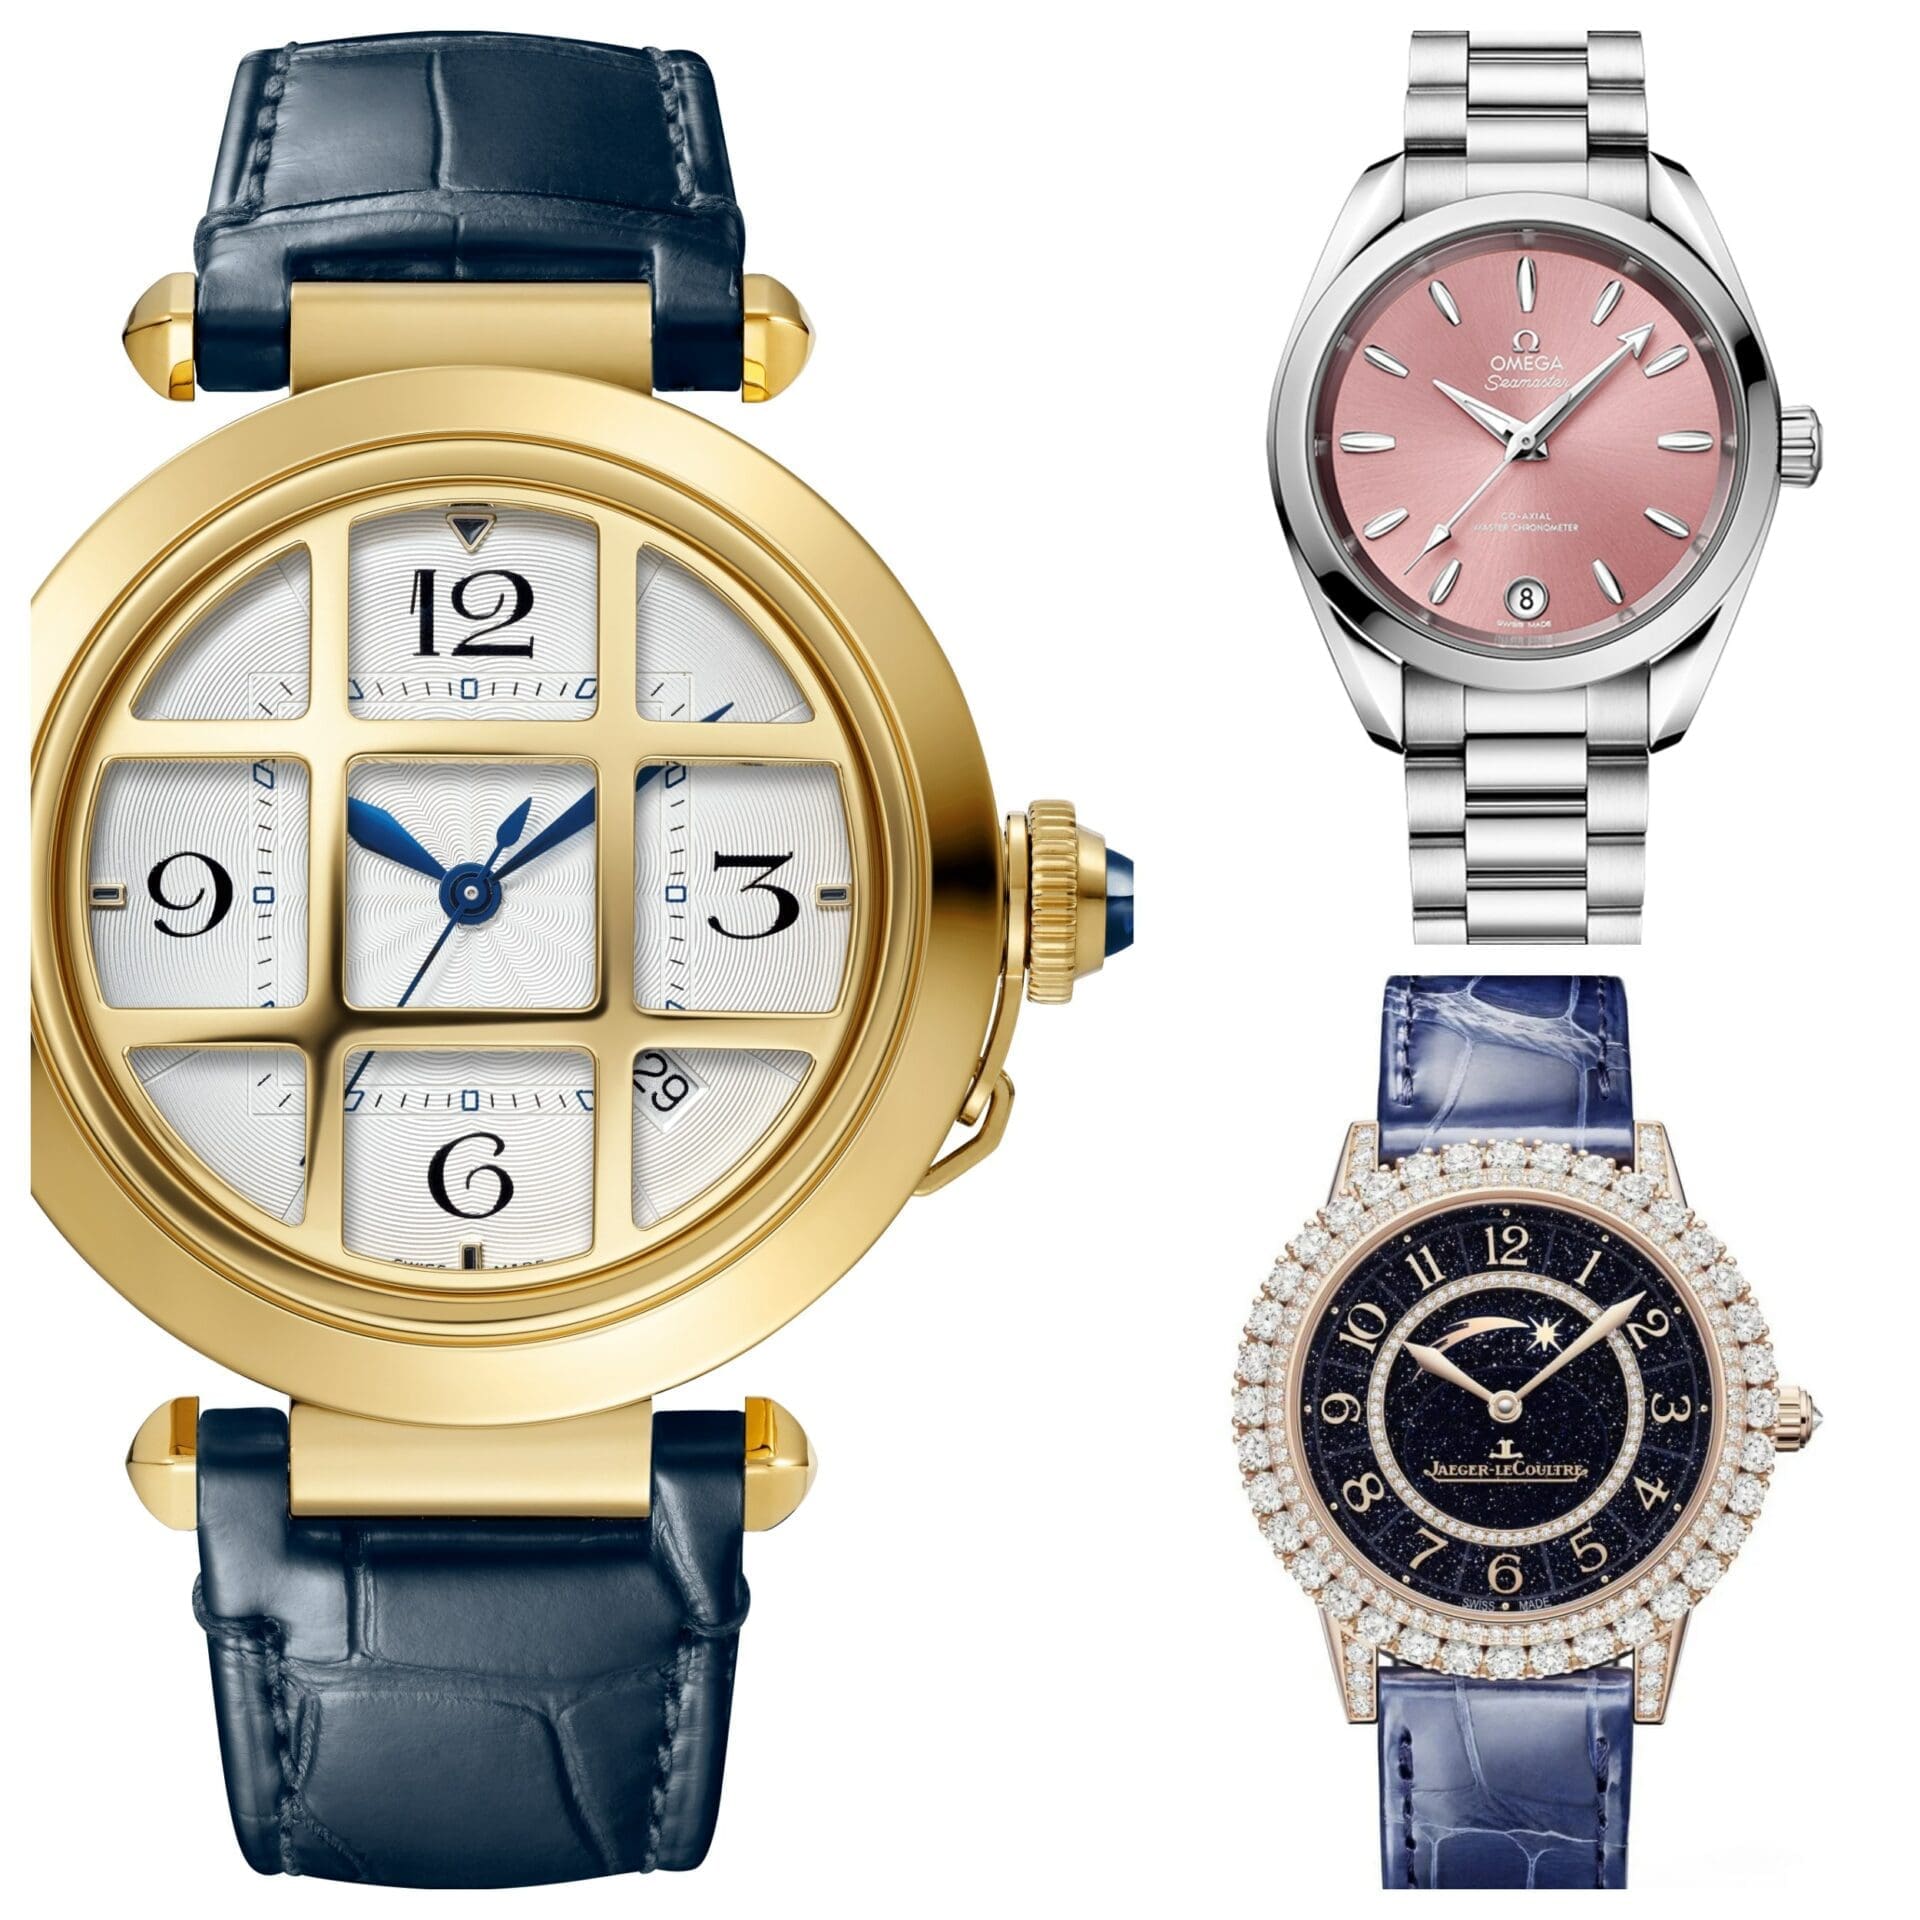 The best women’s watches of 2022 so far…